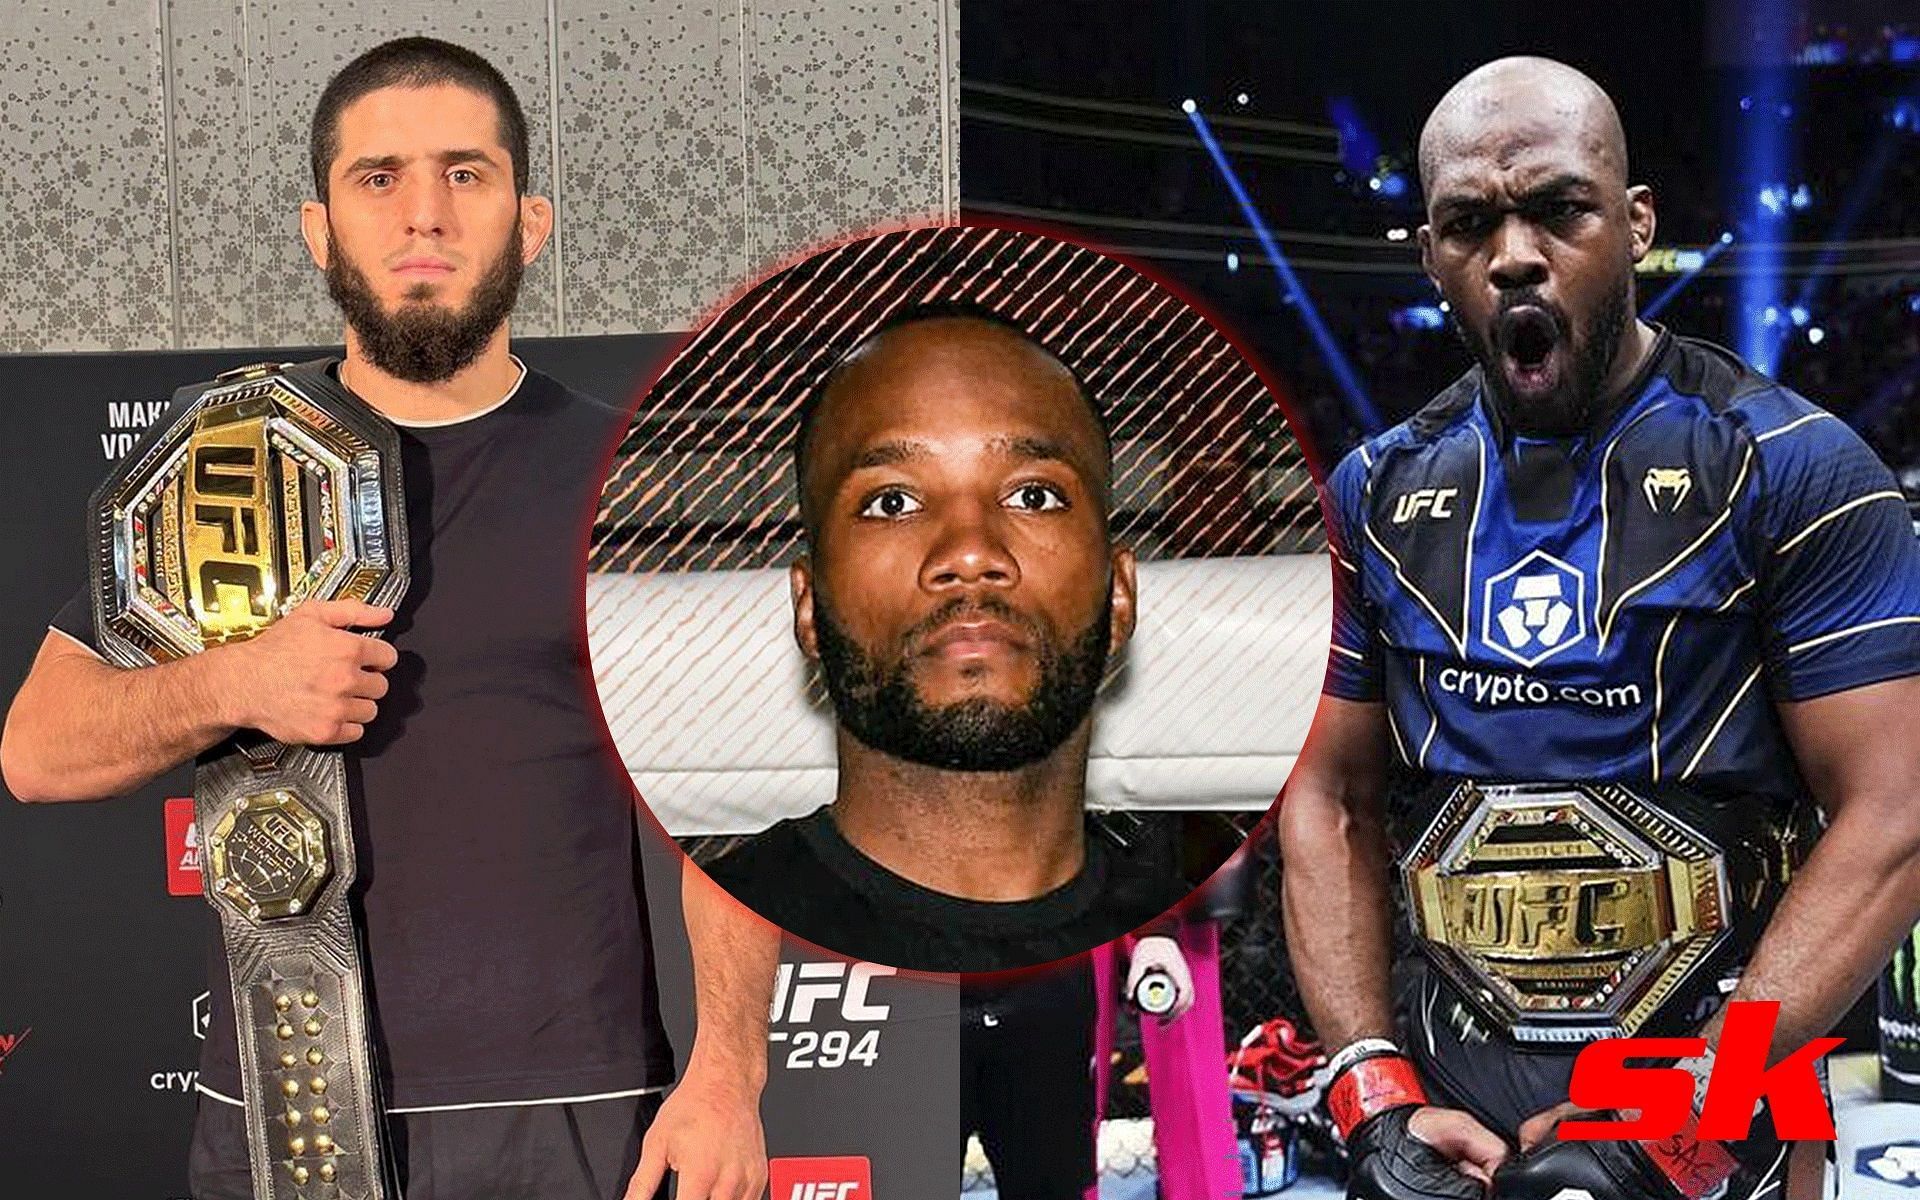 Leon Edwards (middle) kept out Islam Makhachev (left) and Jon Jones (right) from his top-five favorite current UFC champions list [Images courtesy: @leonedwardsmma and @islam_makhachev on Instagram, @ULTfightFANS on Twitter/X]